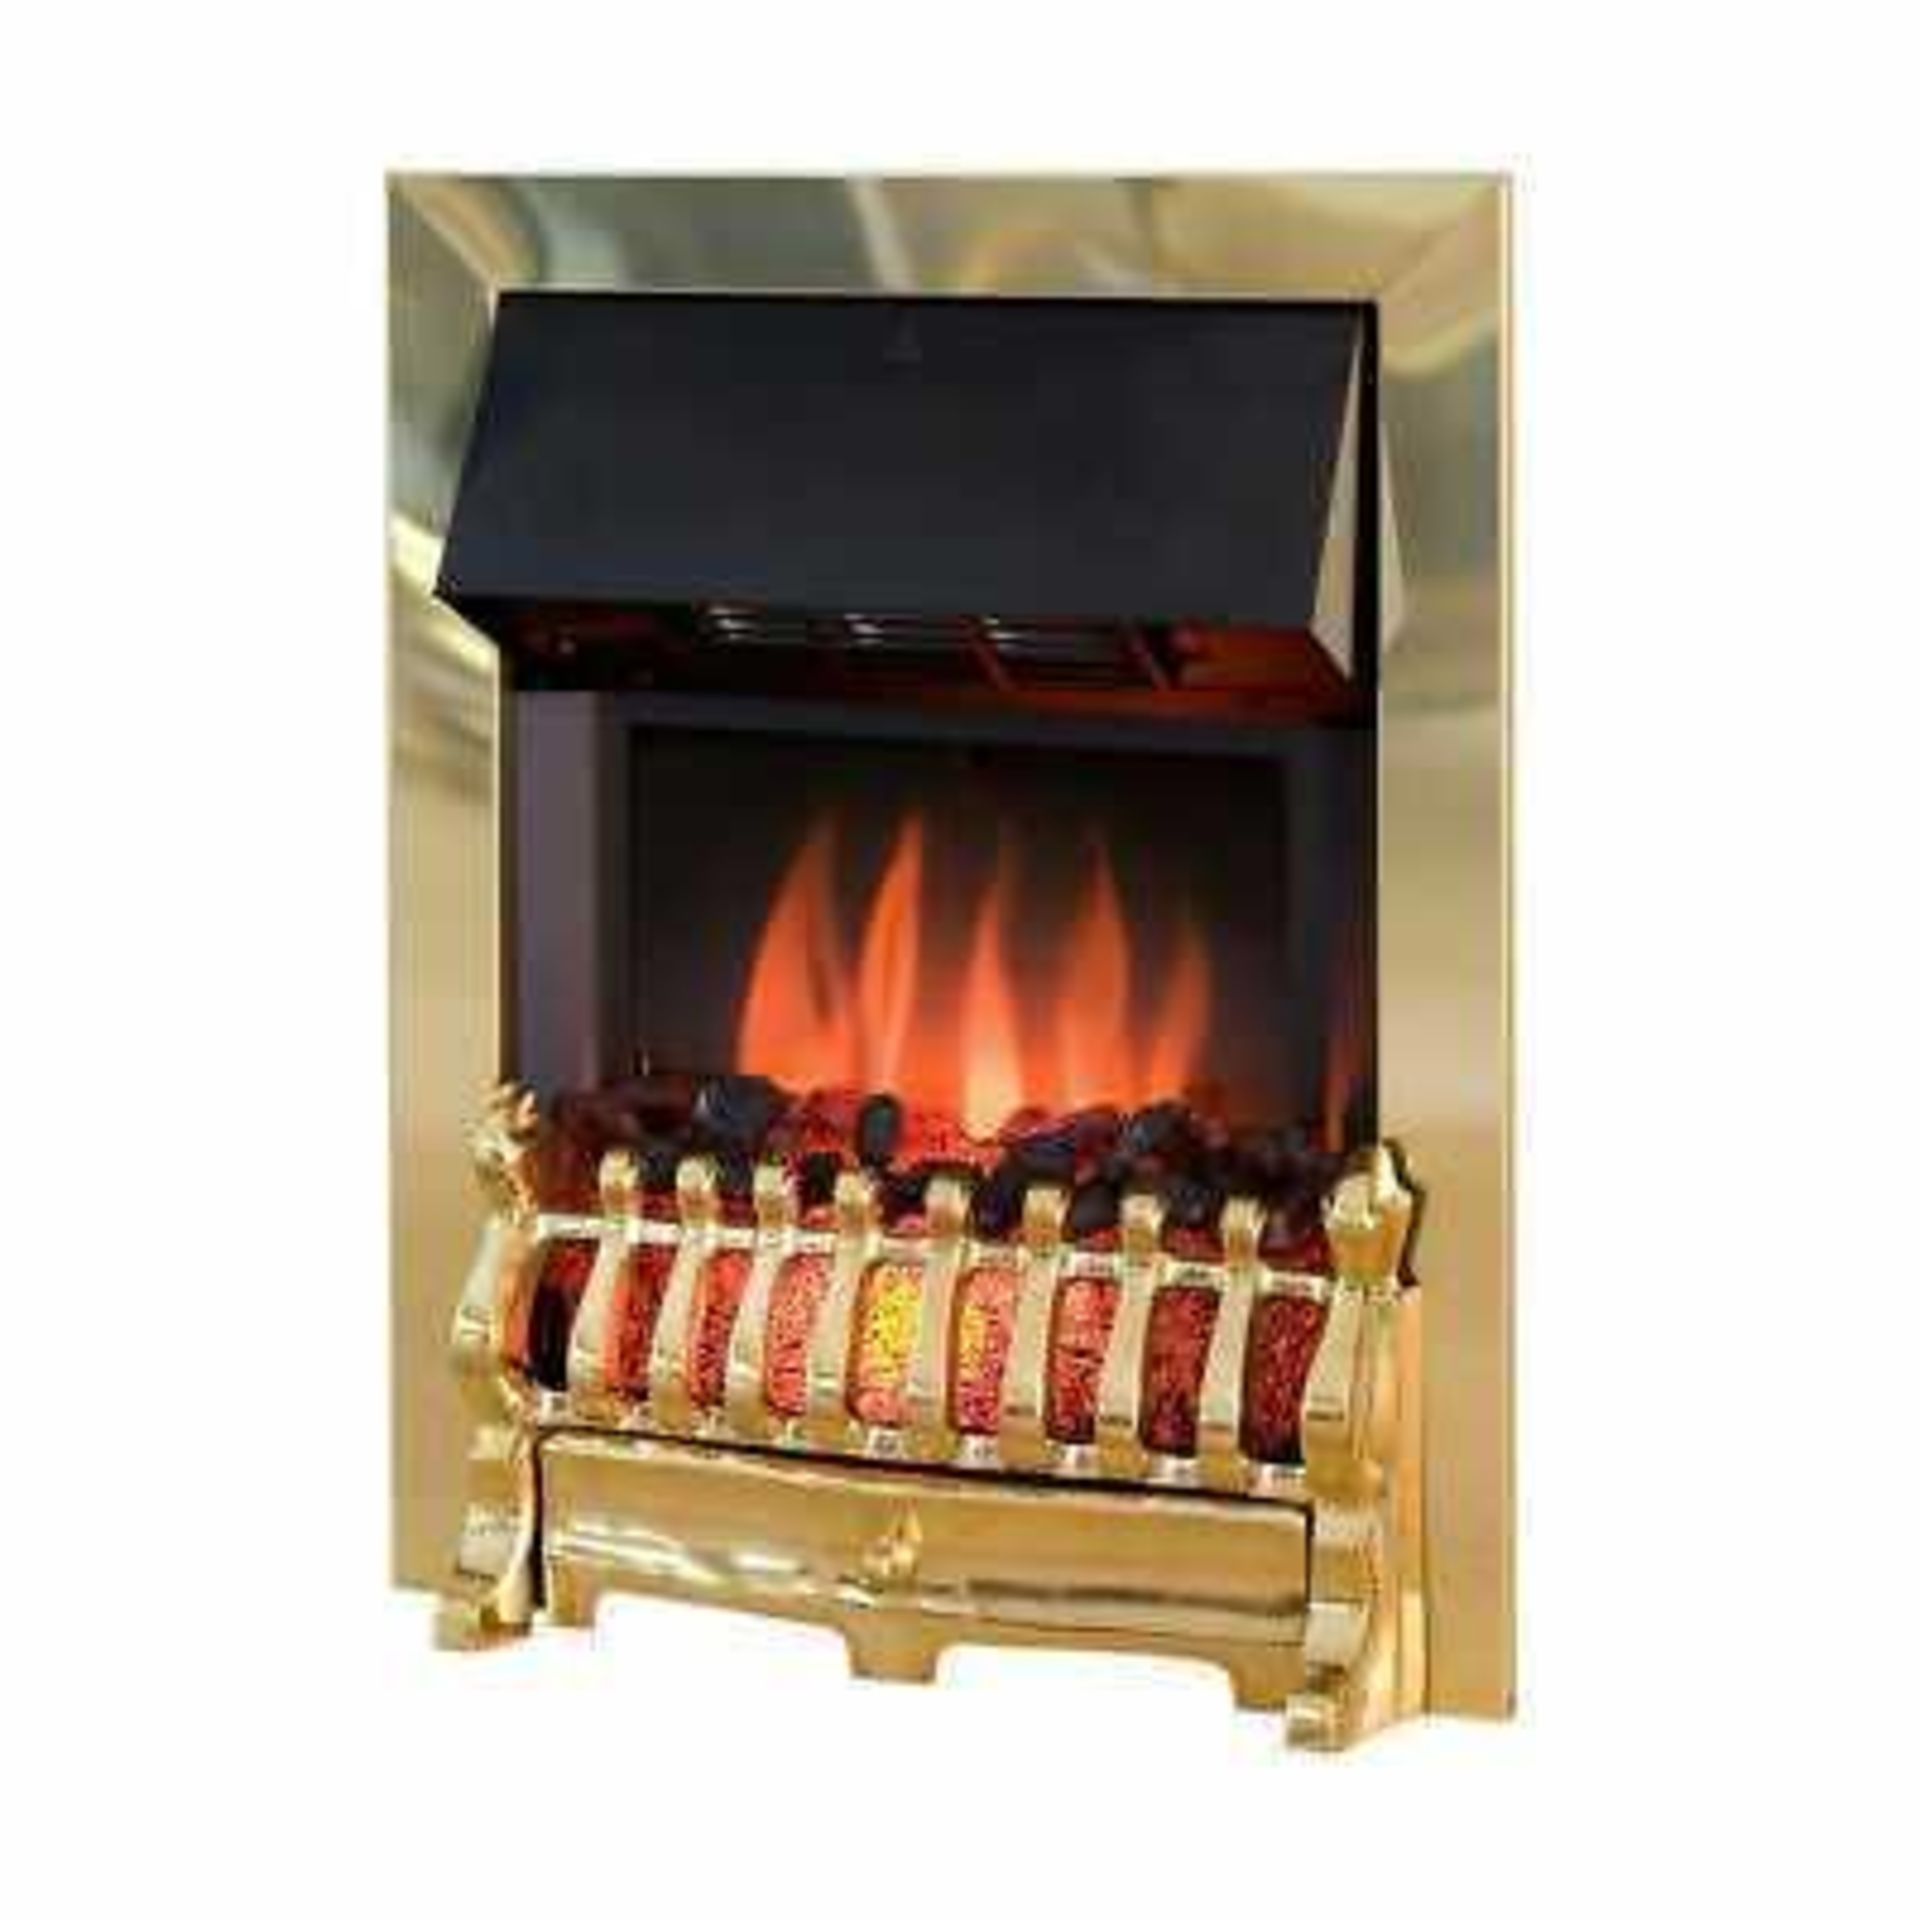 Rrp £180 Boxed Royal Cosey C603Rl Cozy Electric Fire